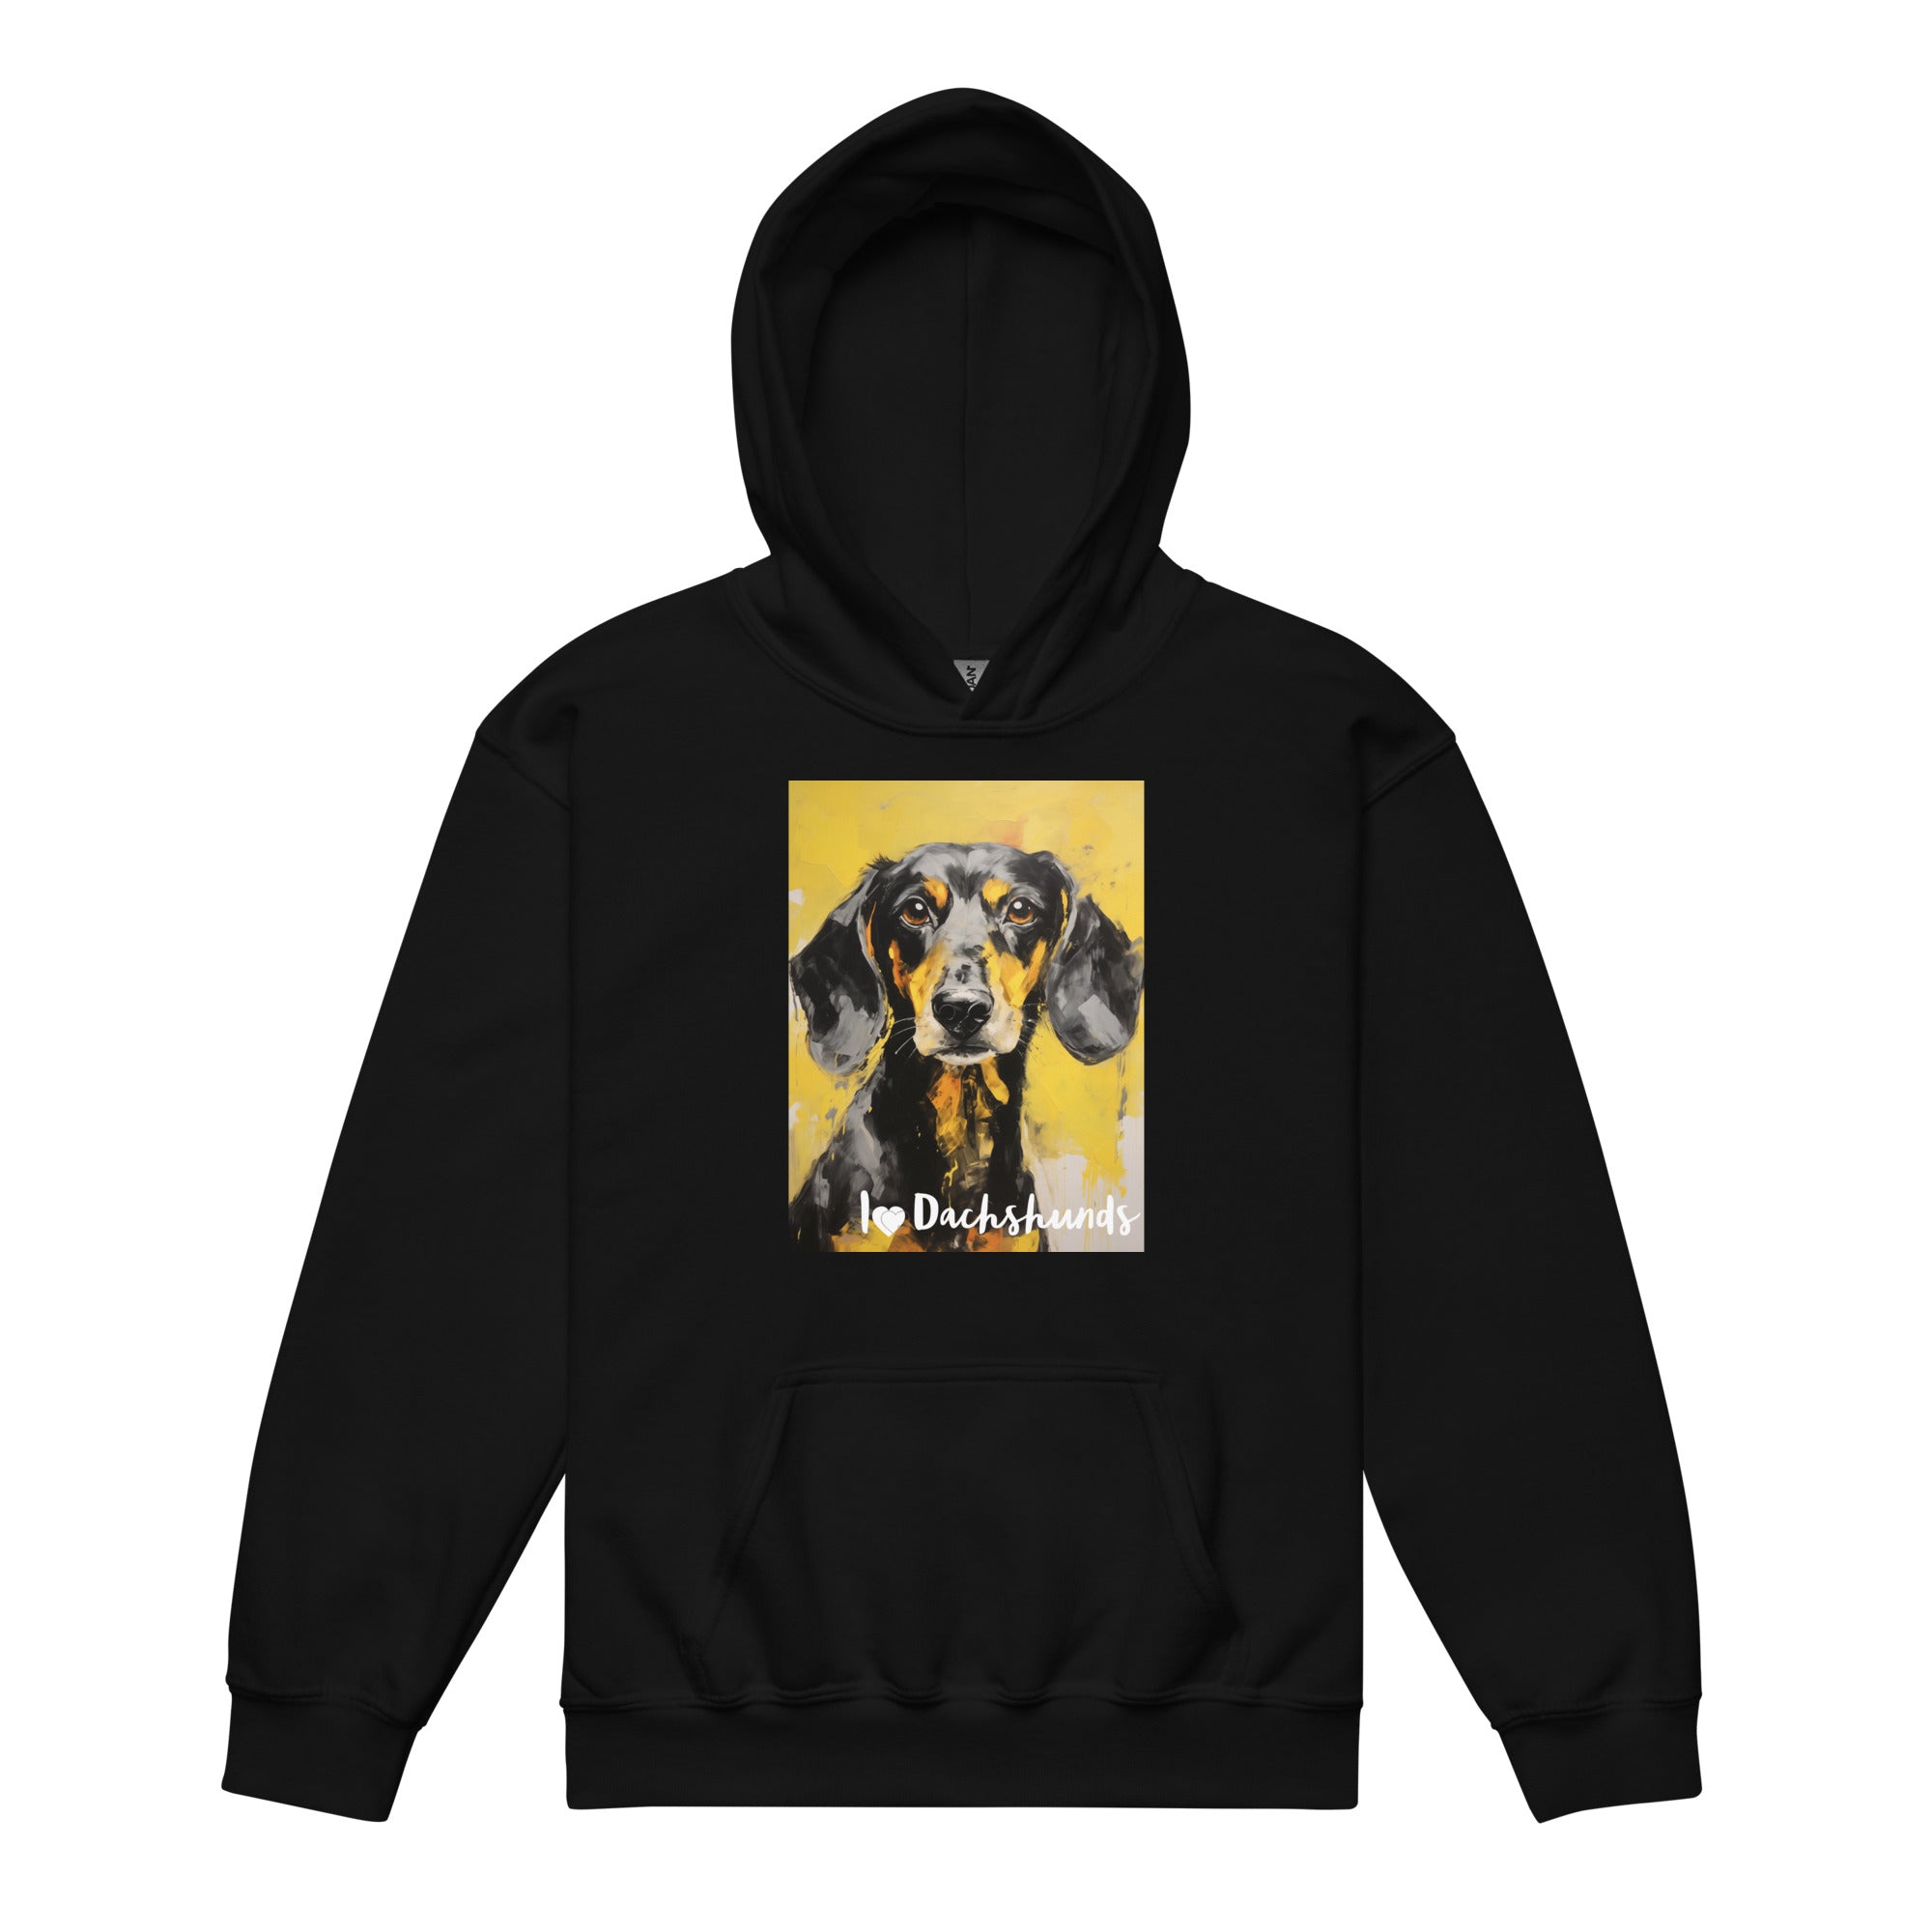 Youth heavy blend hoodie I ❤ Dogs - Dachshund